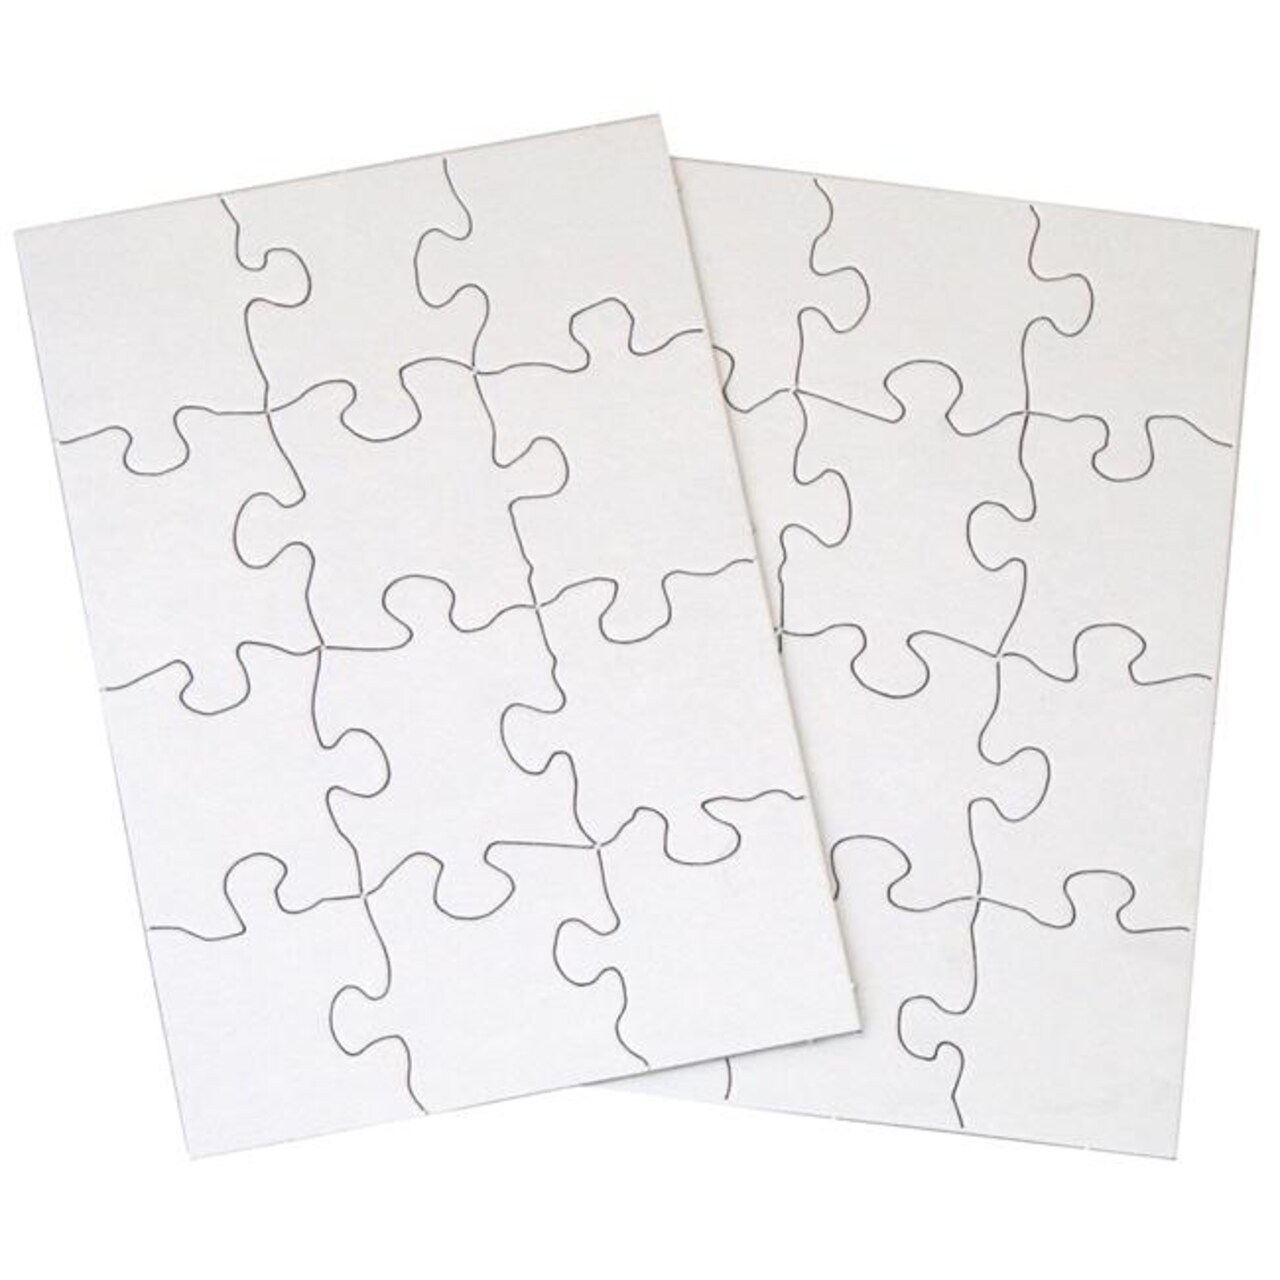 5.5 x 8 in. Blank Puzzle, White - 12 Piece - 12 Per Pack